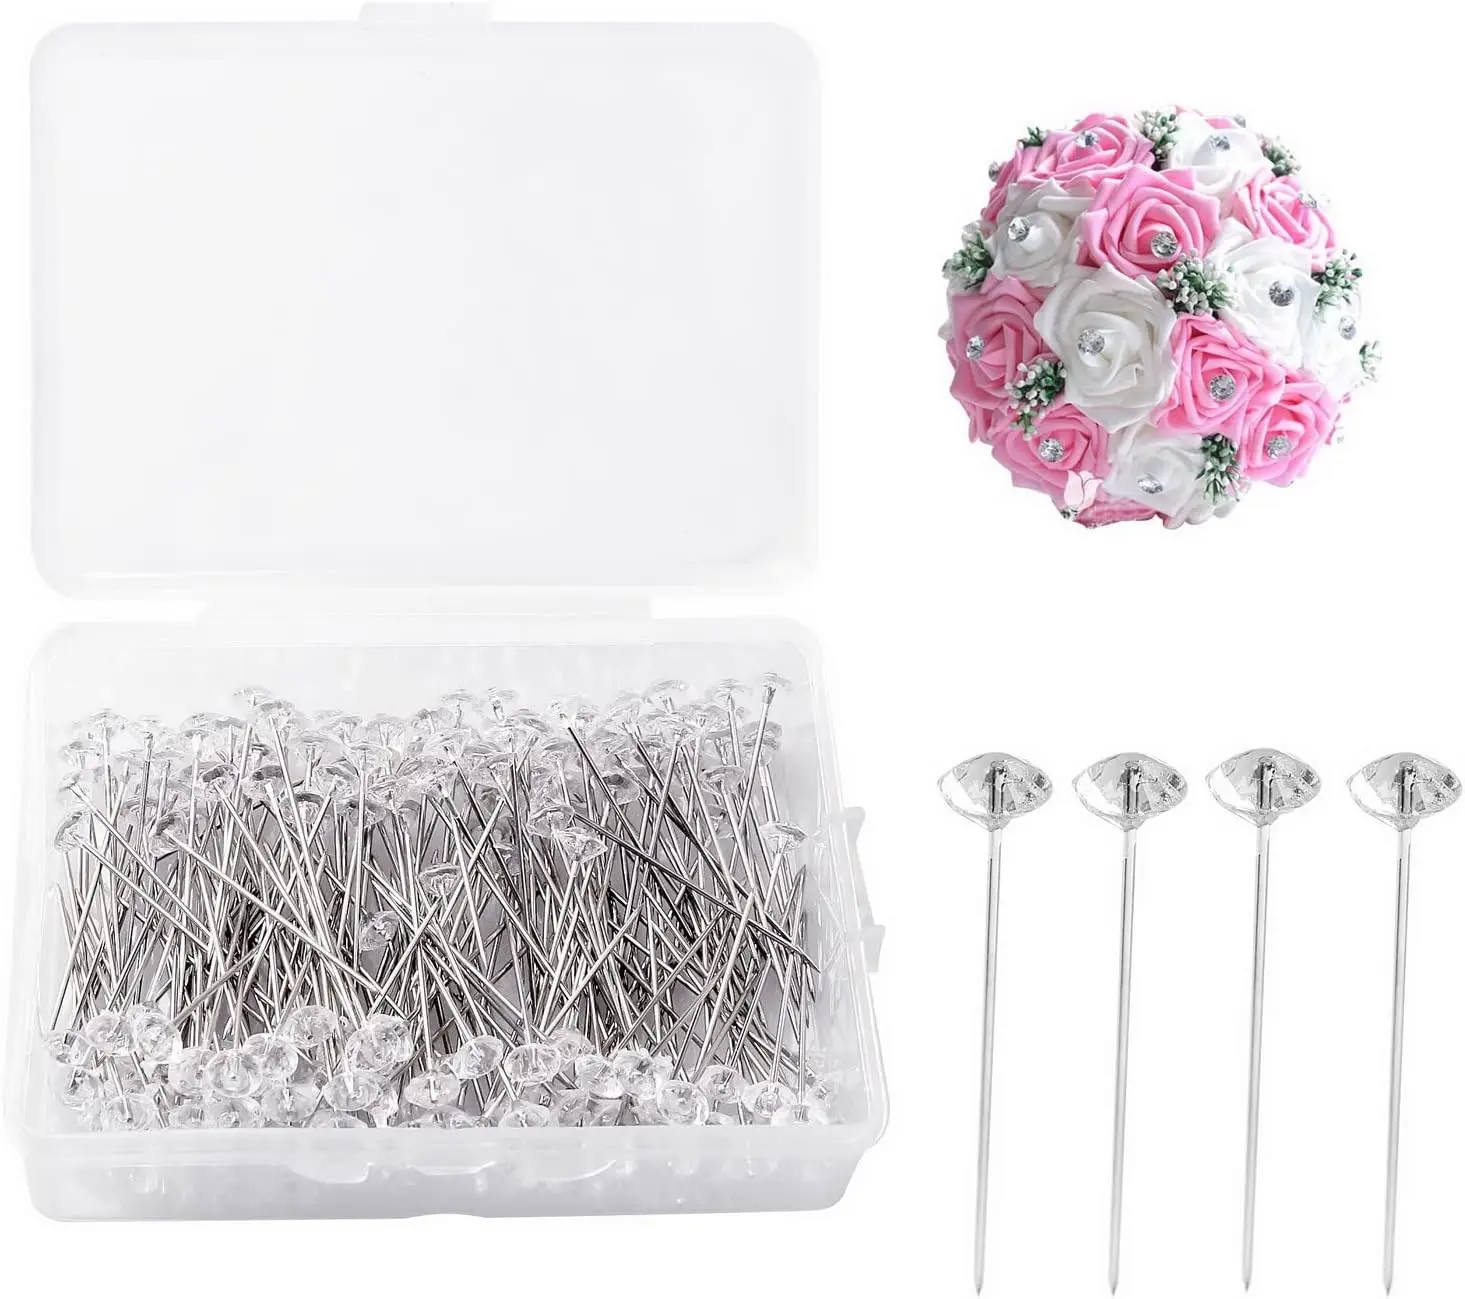 

50Pcs/Box Bouquet Corsages Pins Diamond Rhinestones Pins Crystal Diamante Head Clear Pins for Wedding Jewelry Decoration Craft